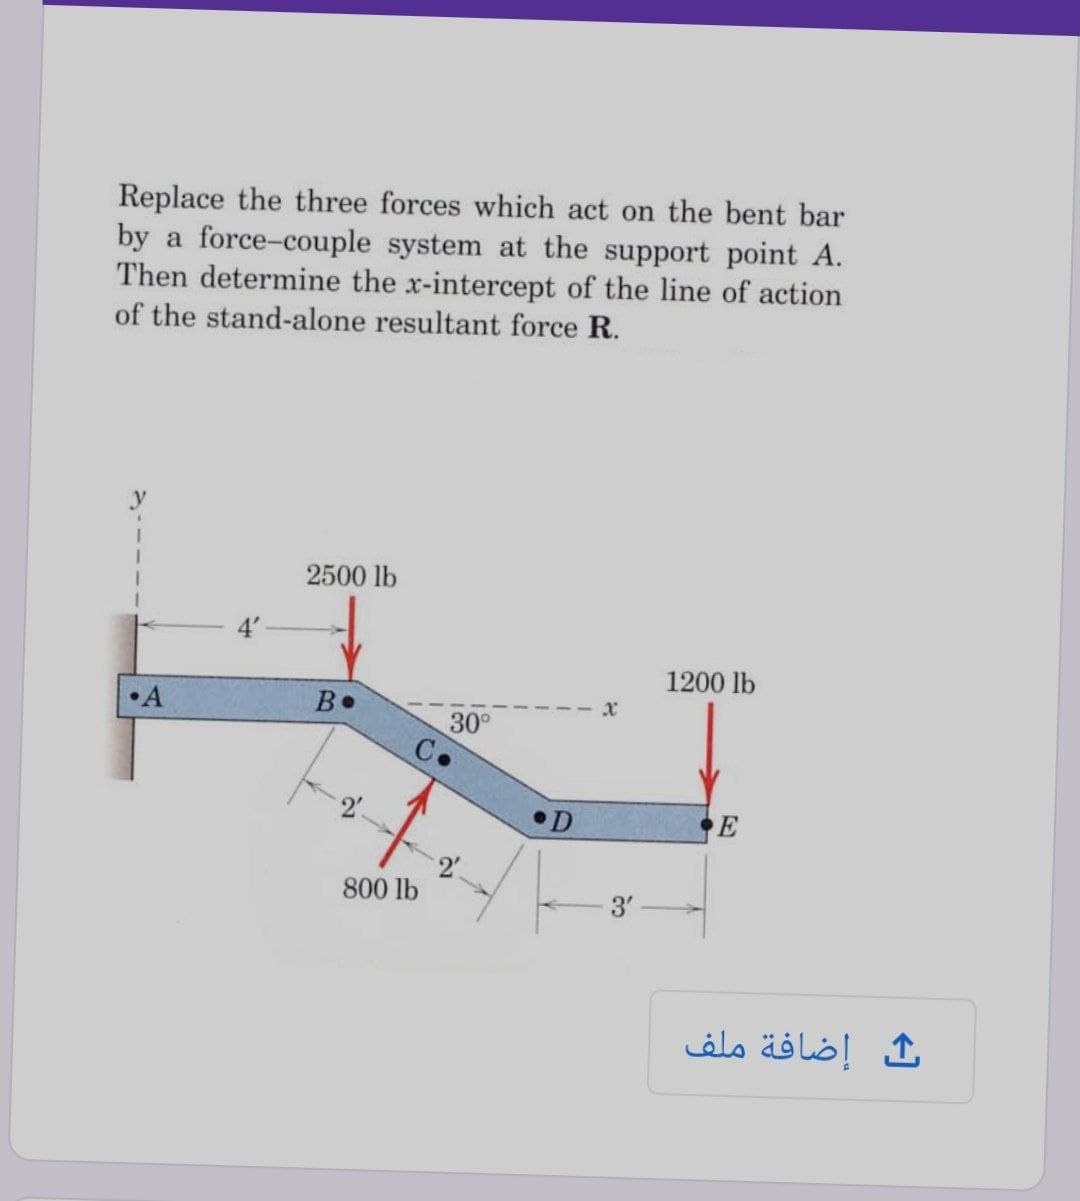 Replace the three forces which act on the bent bar
by a force-couple system at the support point A.
Then determine the x-intercept of the line of action
of the stand-alone resultant force R.
2500 lb
1200 lb
•A
B•
30°
D
E
800 lb
إضافة ملف
